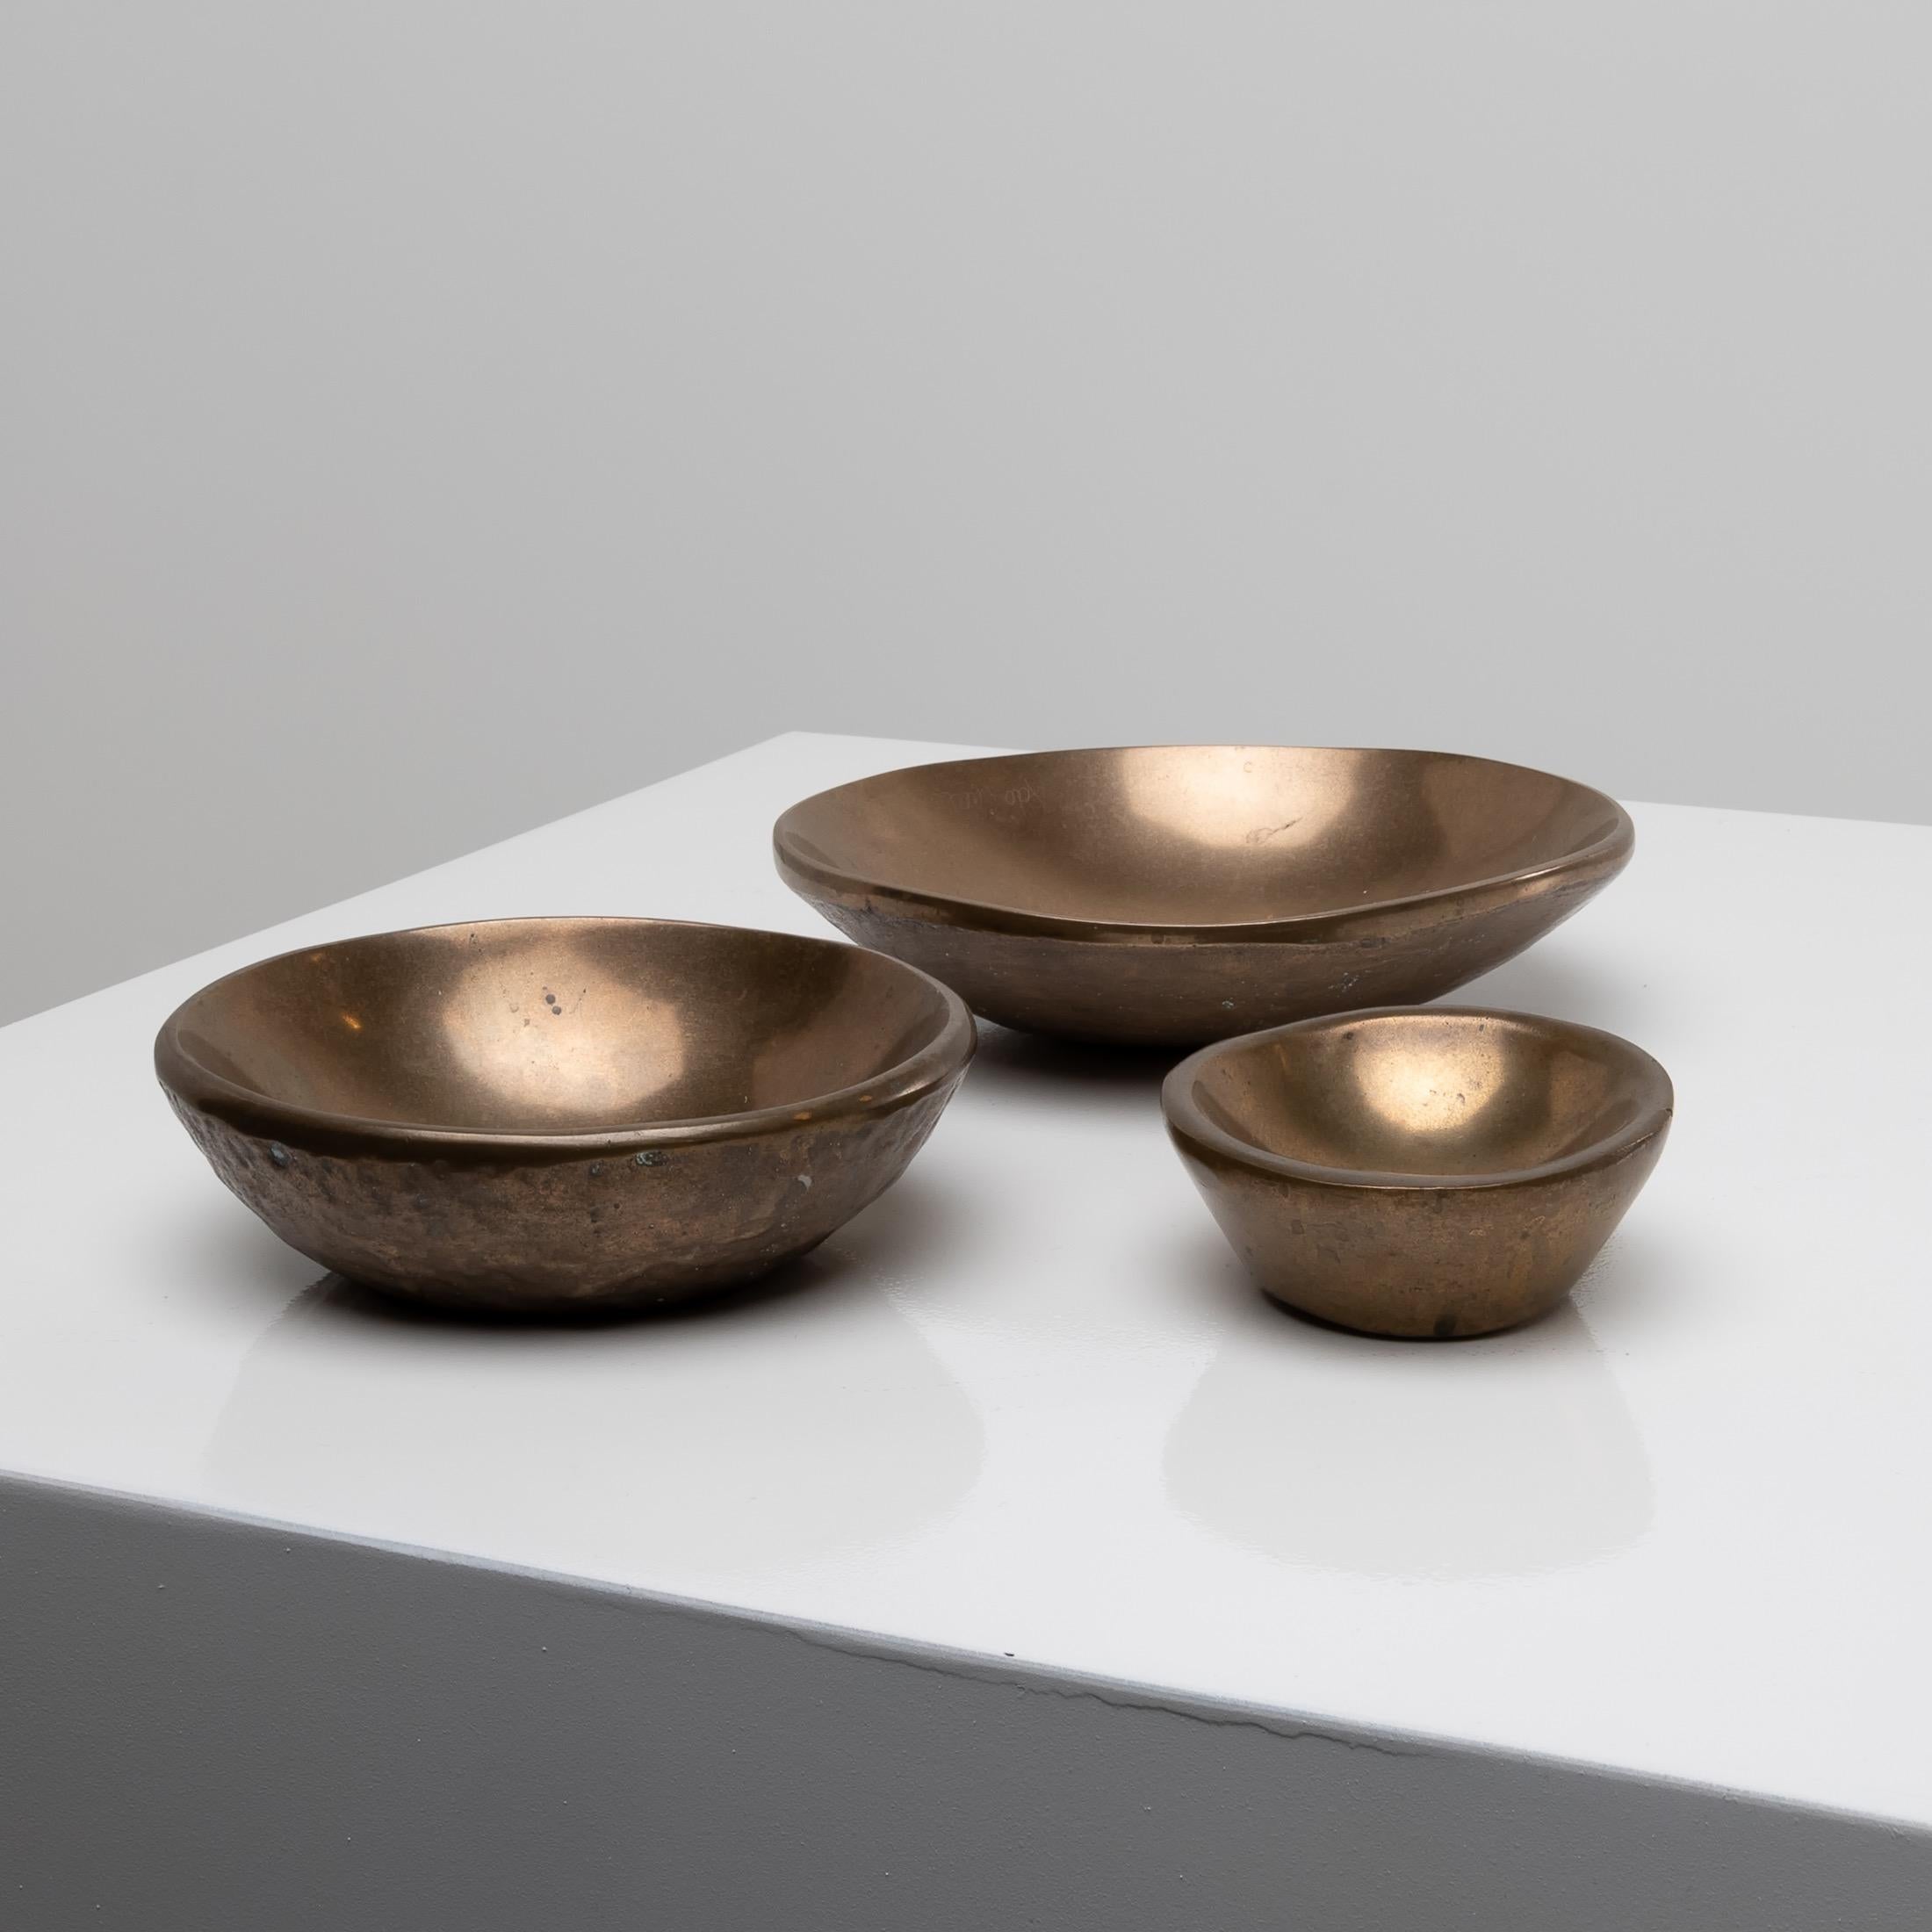 About this set of three cast solid bronze trinket bowls by Ado Chale
Very nice set of three bowls or trinket bowls in cast bronze.
Of different sizes, the three bowls form a very elegant set, the underside of each covered with self-adhesive